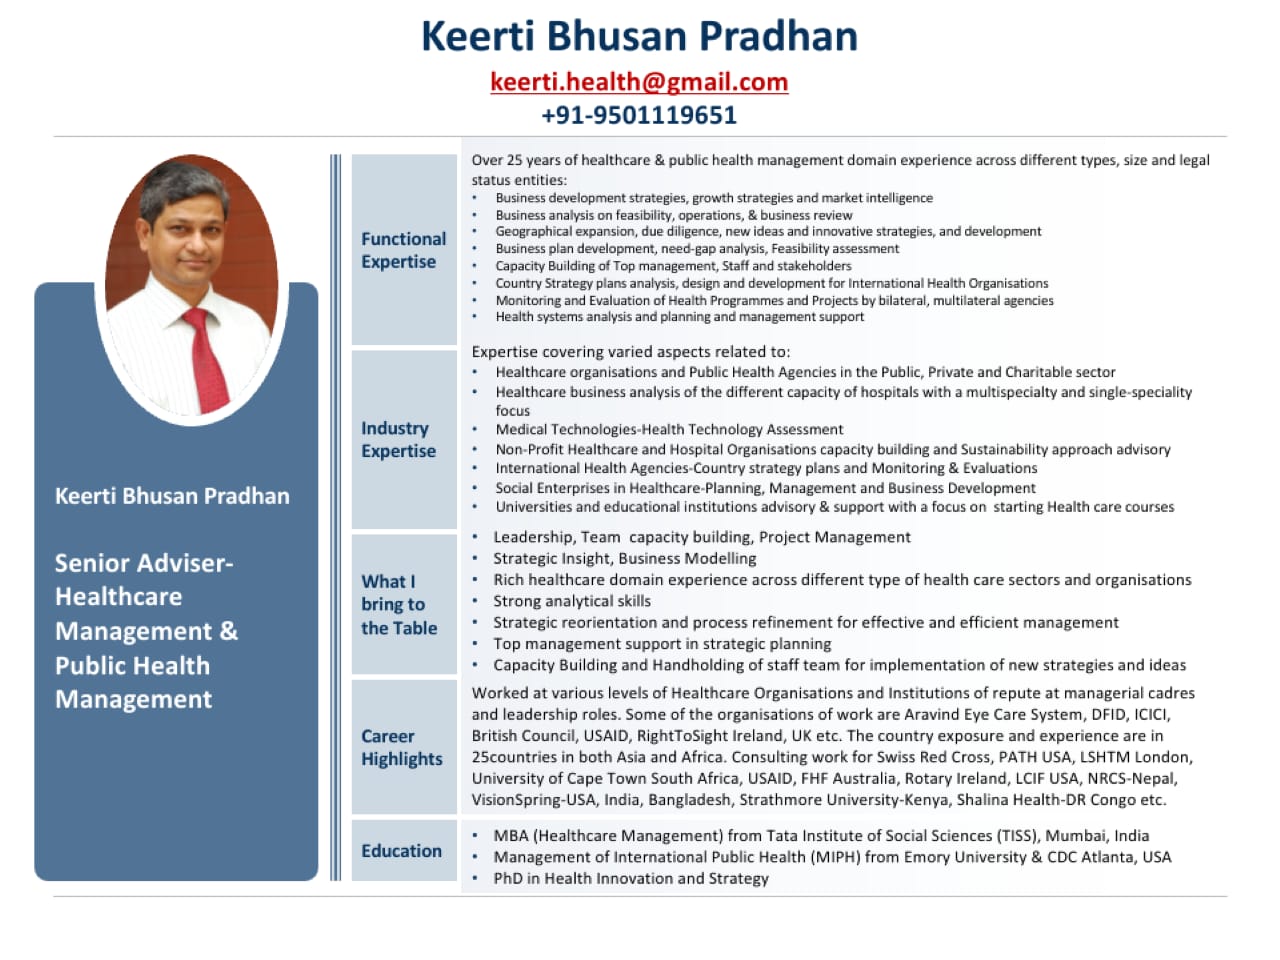 Keerti Bhusan Pradhan

keerti.health@gmail.com
+91-9501119651

Over 25 years of healthcare &amp; public health management domain experience across different types, size and le
status entities
+ Busnes development st stegpes, growth st atees snd marke mteligence
+ Buuness arava on feas bity, operations, &amp; busmets review

Functional © Geo ehcal expunson, due digence. new eas and innovative strategies snd development
+ Butness plan development. need gap Inafyis, eau ty suietiment

Expertise. Capacity Buch of Top management, Stall and stakehcidens
+ Country Strategy plans ansiyan, devin snd development for International Heskth Organastions
+ Monitoring anc fvakustion of Health Programmes and Projects by Biatersl, mutiateral agencies
© Meath systems snus 3nd planning and management wRpot

 

   

Expertise covering varied aspects related to
+ Healthcare organisations and Public Health Agencies in the Public, Private and Charitable sector
+ Healthcare business analysis of the different capacity of hospitals with a multispecialty and single. speciality
focus.
Industry + Medical Technologies-Health Technology Assessment
Expertise + Non-Profit Healthcare and Hospital Organisations capacity building and Sustainability approach advisory
+ International Health Agencies. Country strategy plans and Monitoring &amp; Evahuations
+ Social Enterprises in Healthcare-Planning, Management and Business Development

Keerti Bhusan Pradhan + Universities and educational institutions advisory &amp; support with a focus on starting Health care courses

* Leadership, Team capacity building, Project Management

Senior Adviser- «+ Strategic Insight, Business Modelling
What | + Rich healthcare domain experience across different type of health care sectors and organisations.
Healthcare bringto © Strong analytical skits

the Table ° Strategic reorientation and process refinement for effective and efficient management
+ Top management support in strategic planning

Management &amp;
Public Health + Capacity Building and Hancholcing of staff team for implement

Management

 

on of new strategies and ideas

  

Worked at various levels of Healthcare Organisations and Institutions of repute at managerial cadres,
and leadership roles. Some of the organisations of work are Aravind Eye Care System, DFID, ICKC
Career British Council, USAID, RightToSight Ireland, UK etc. The country exposure and experience are in
Highlights 25countries in both Asia and Africa. Consulting work for Swiss Red Cross, PATH USA, LSKTM London,
University of Cape Town South Africa, USAID, FHF Australia, Rotary Ireland, LCIF USA, NRCS-Nepal,
VisionSpring-USA, India, Bangladesh, Strathmore University-Kenya, Shalina Health-OR Congo etc.

* MBA (Healthcare Management) from Tata Institute of Social Sciences (TISS), Mumbai, India
Education. Management of International Public Health (MIPH) from Emory University &amp; COC Atlanta, USA
+ PhD in Health Innovation and Strategy